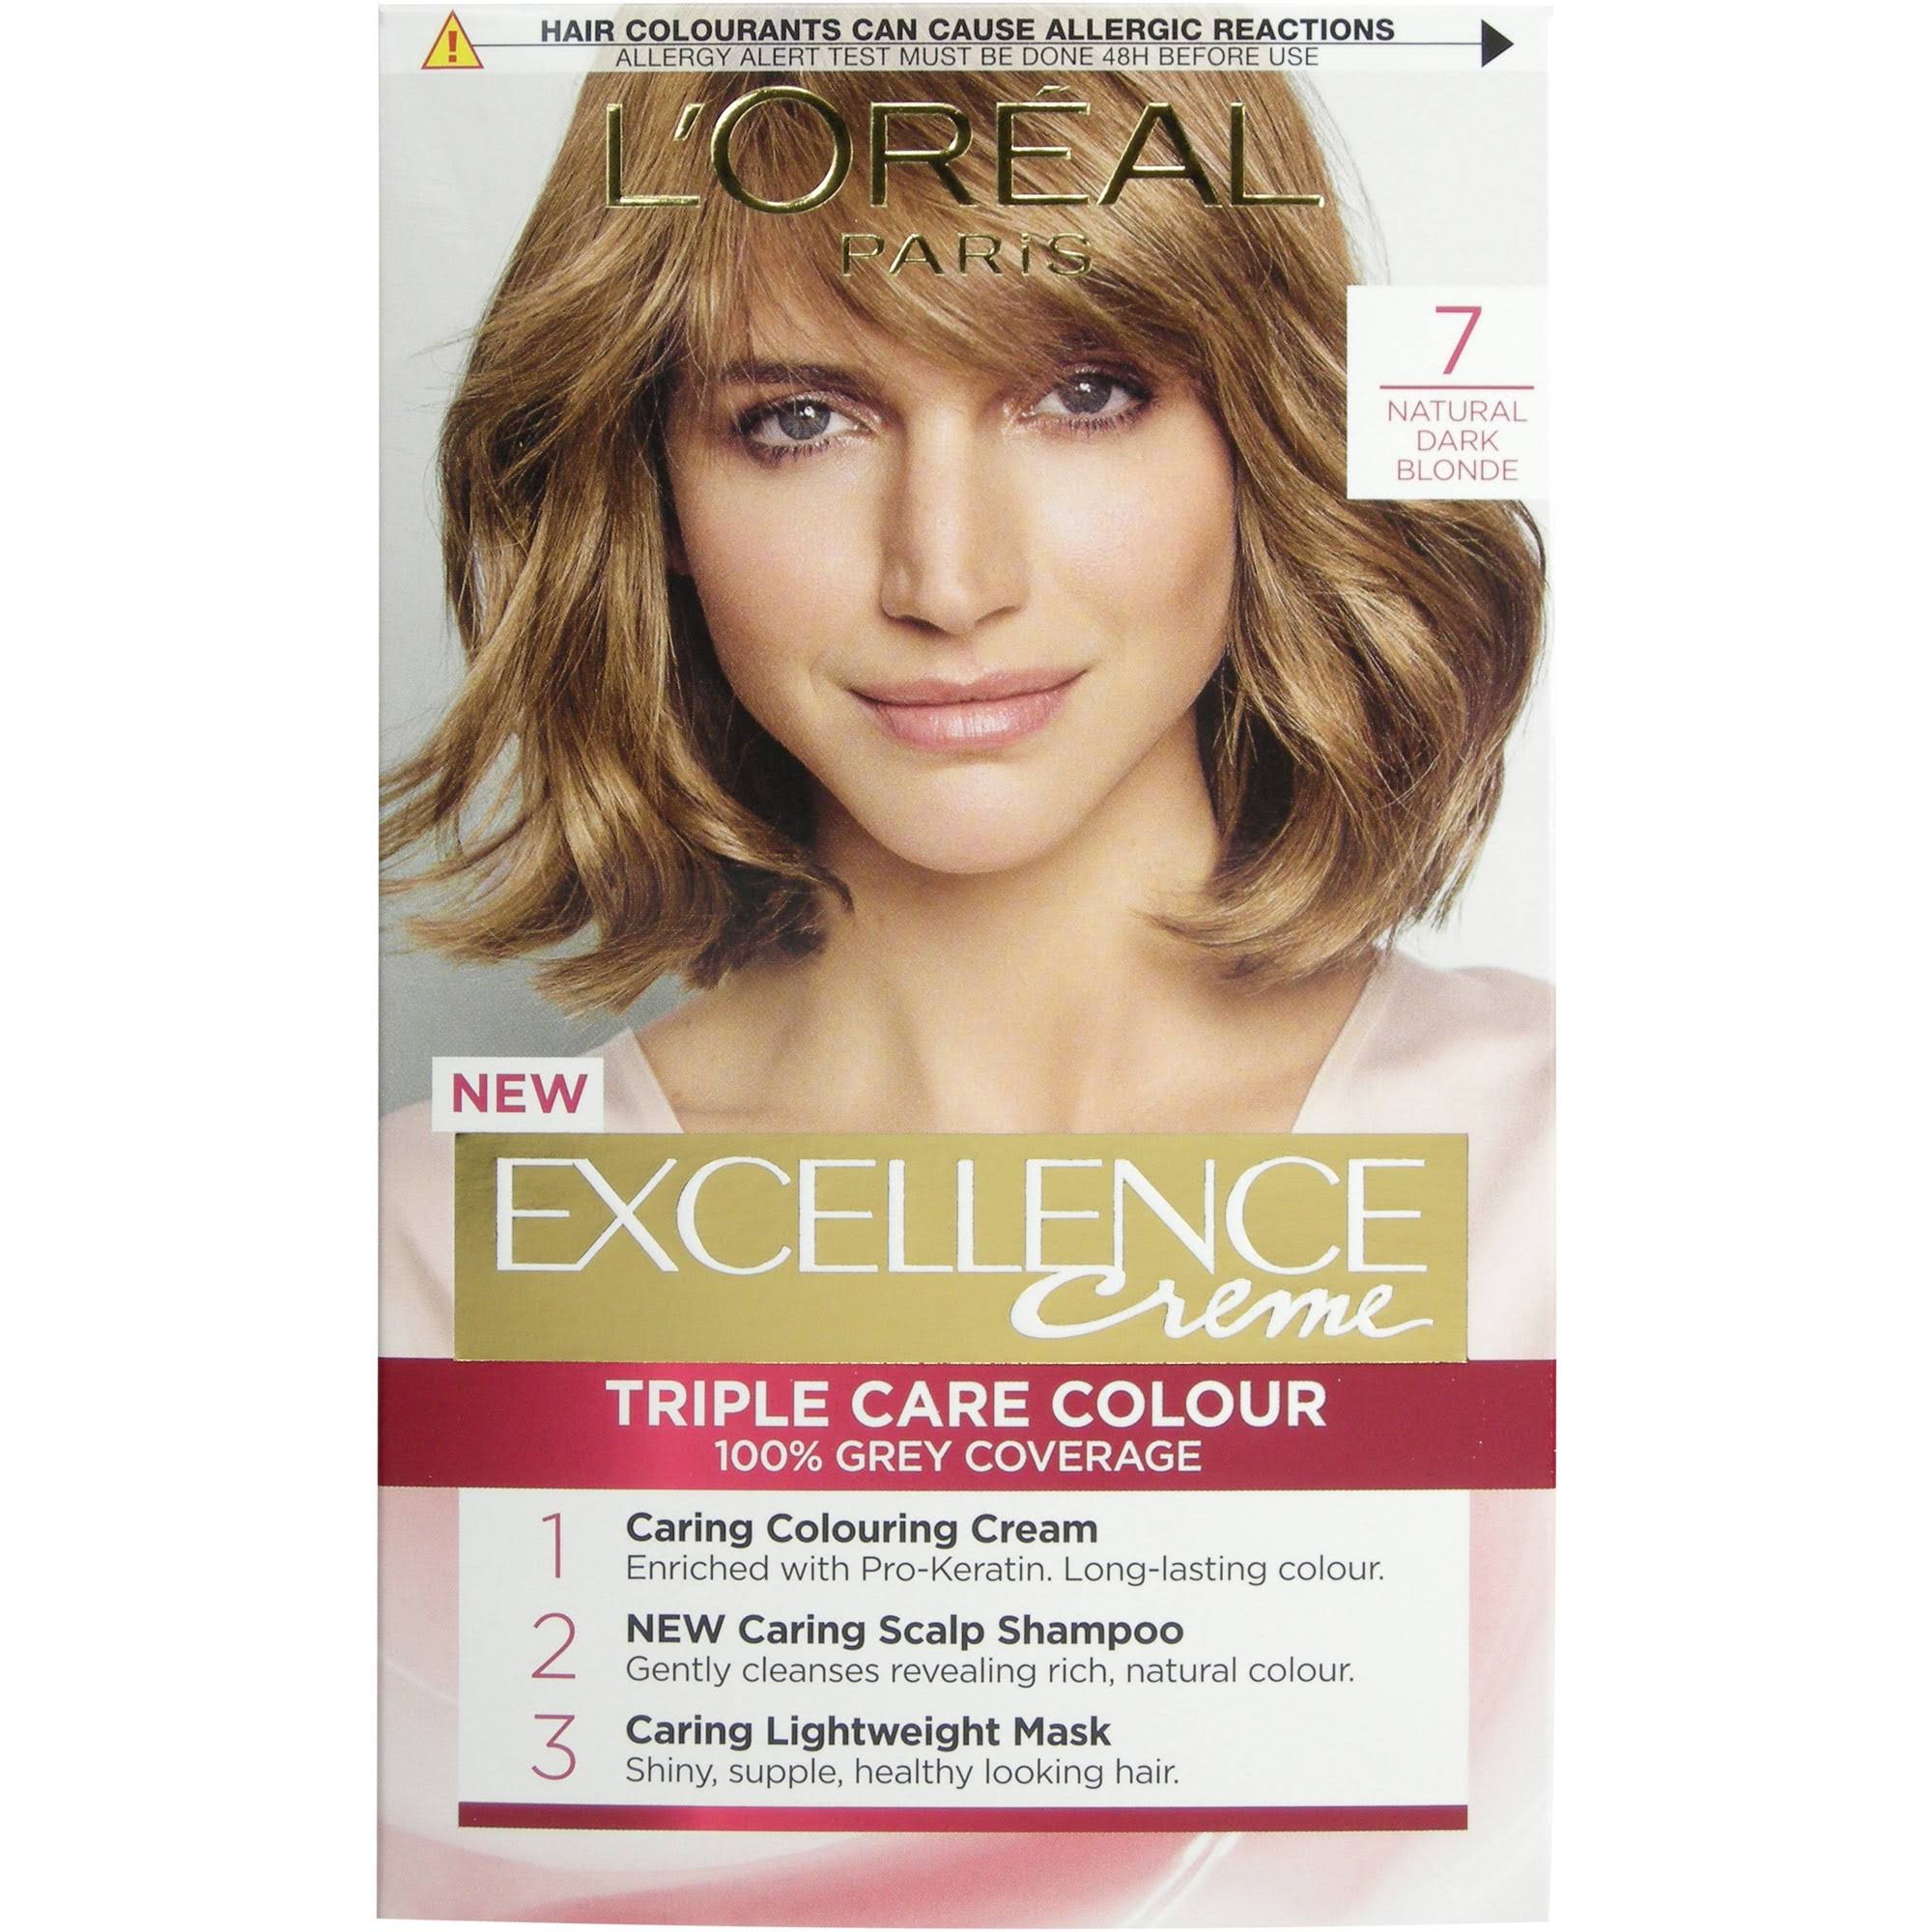 L'Oreal Excellence Permanent Hair Dye - 7 Natural Dark Blonde